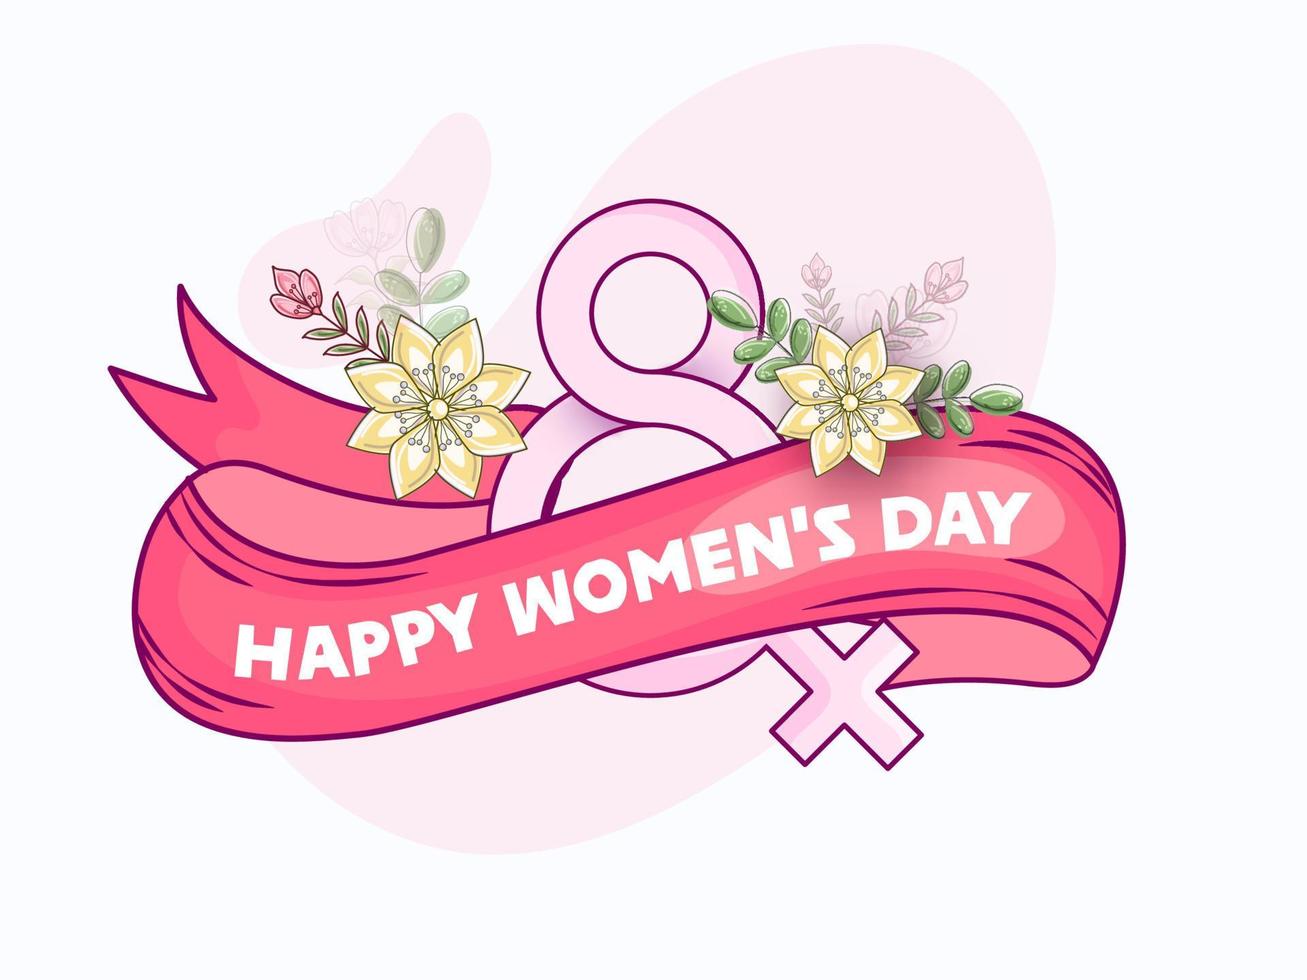 Happy Women's Day Concept With Text 8, Venus Symbol And Florals On White Background. vector